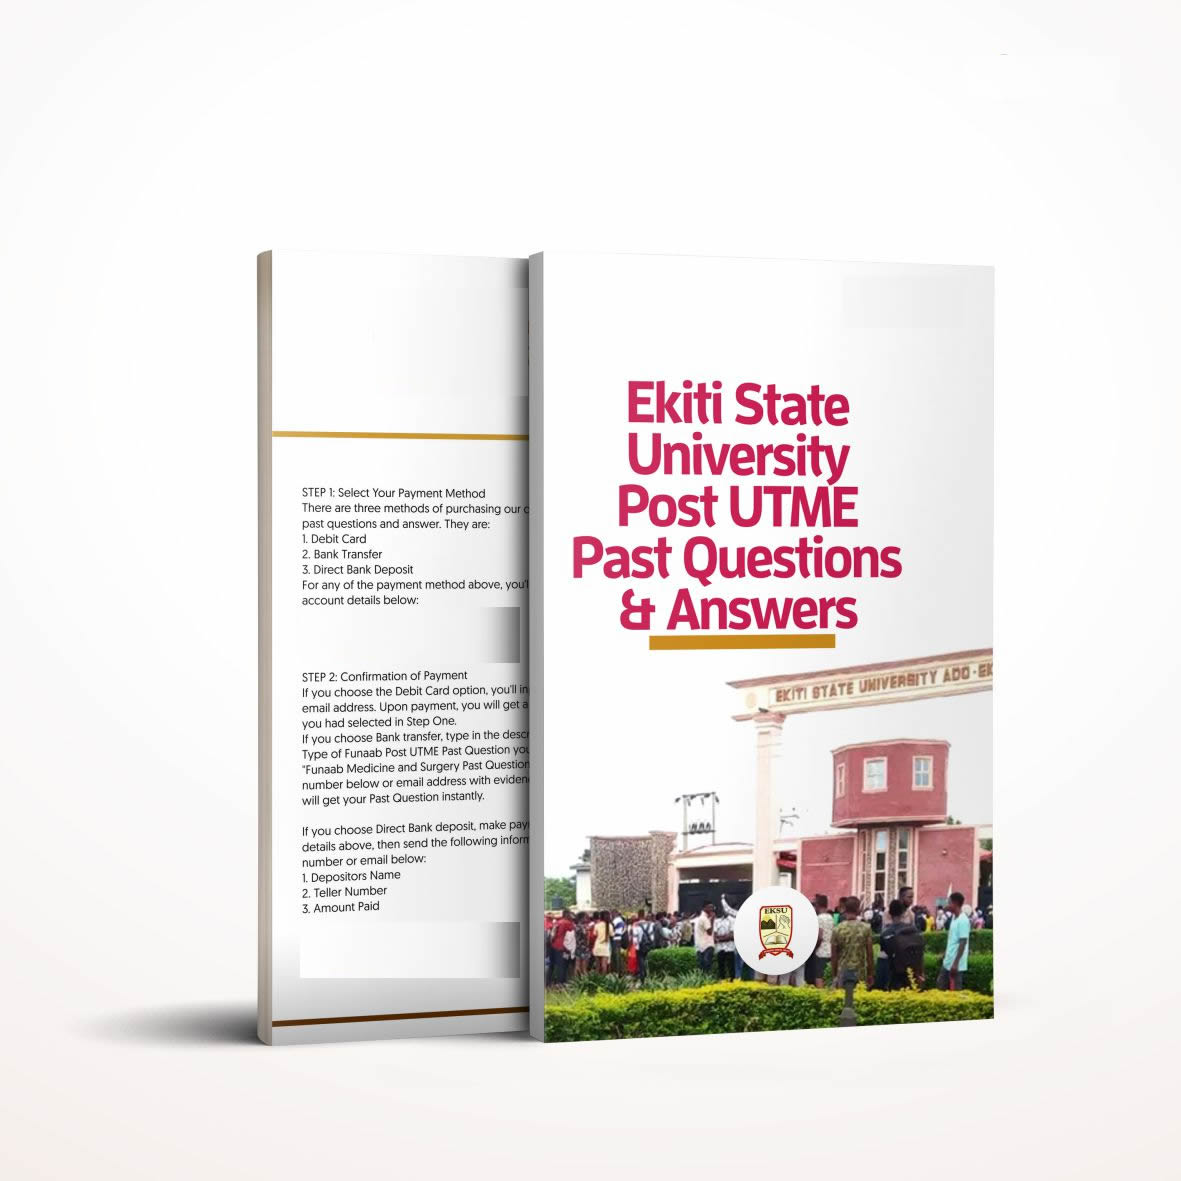 EKSU post utme past questions and answers - Pdf